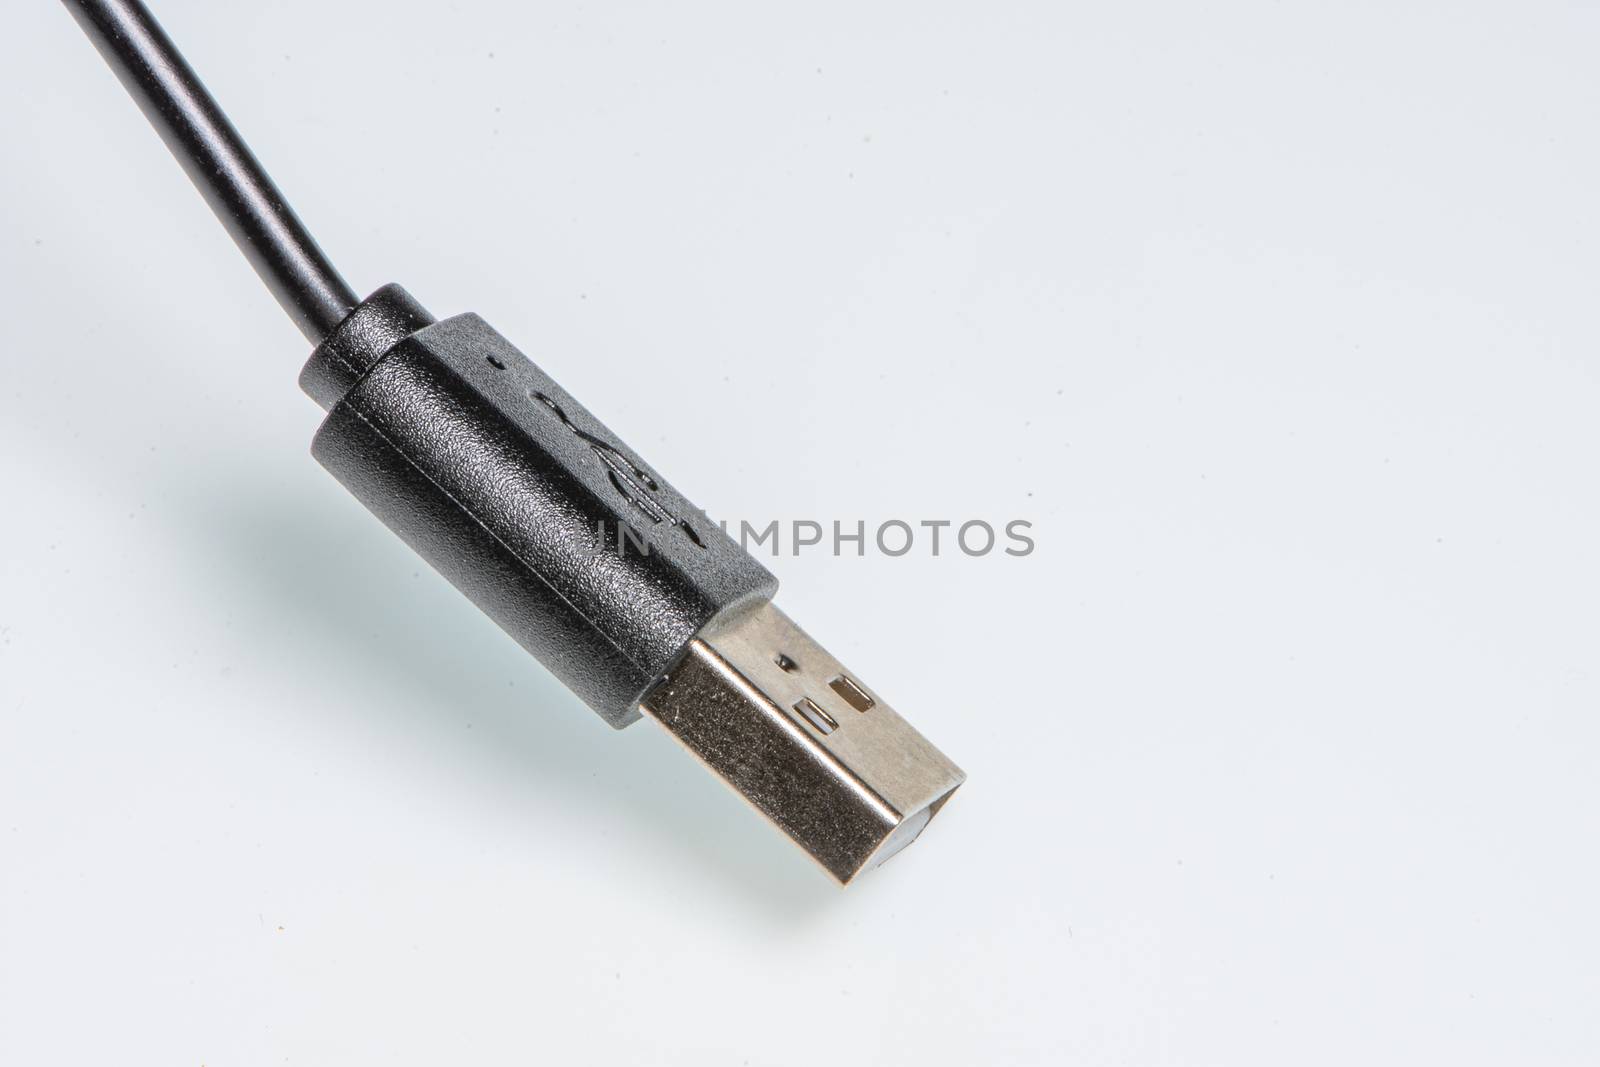 detail of a standard black usb connector by brambillasimone